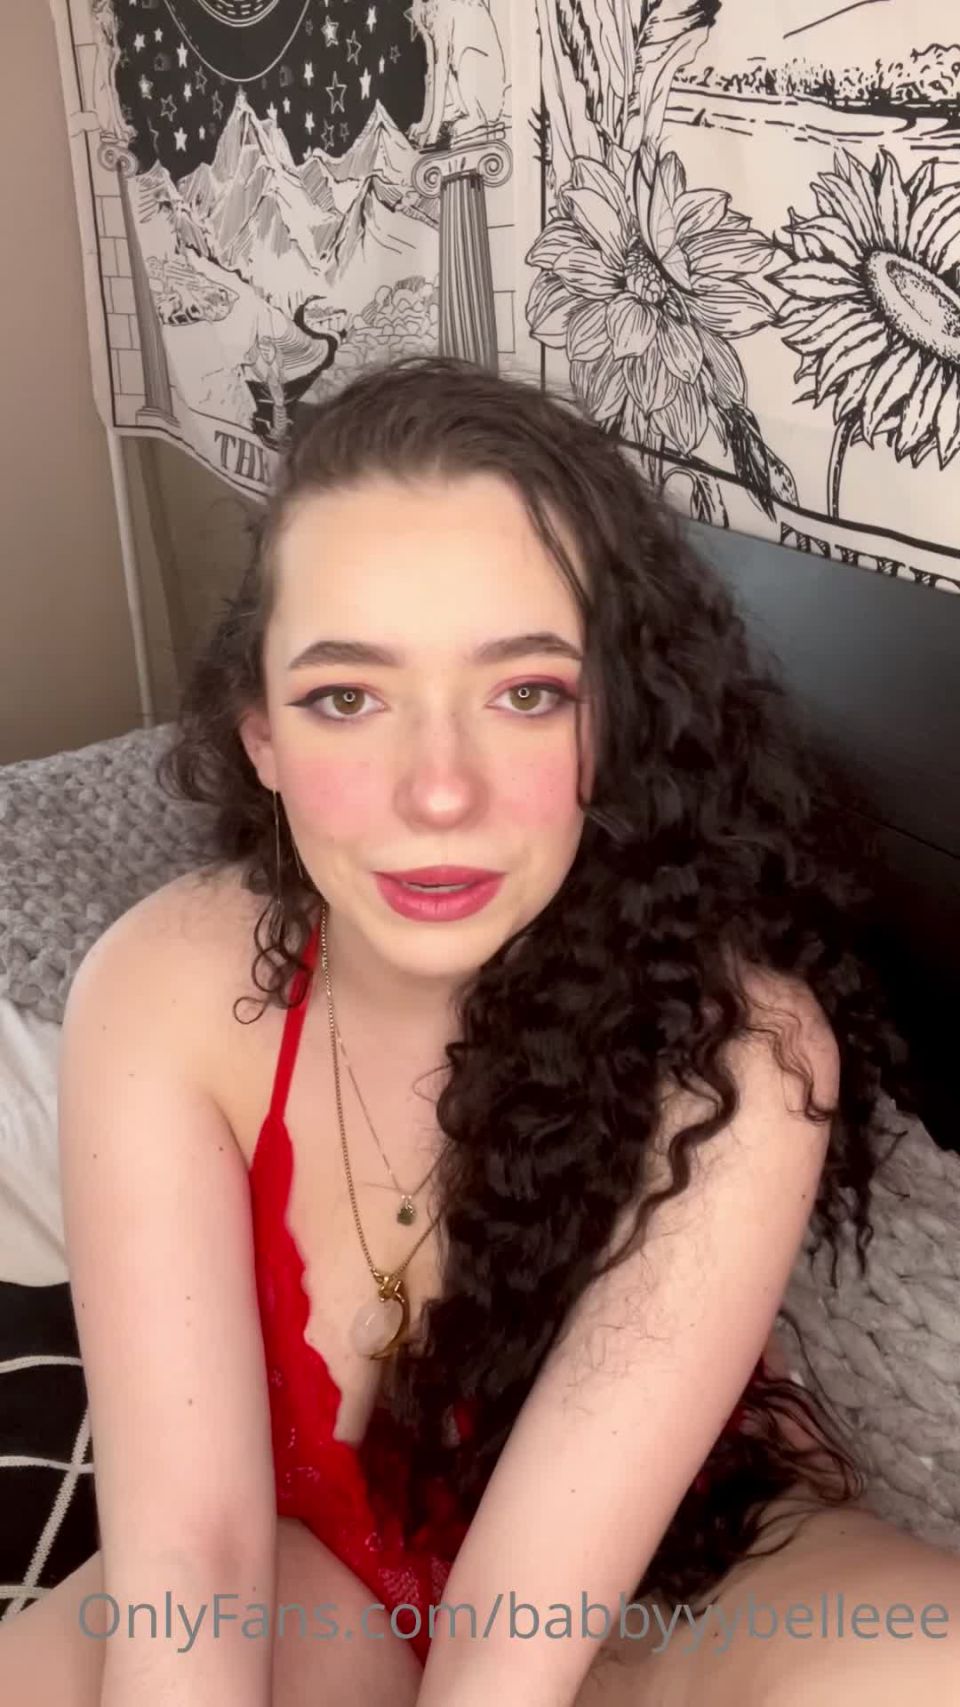 Baby belle – You were late so i tell you to watch while i masturbate and suck my toes_963 (@babbyyybelleee) (11.07.2021) Foot!